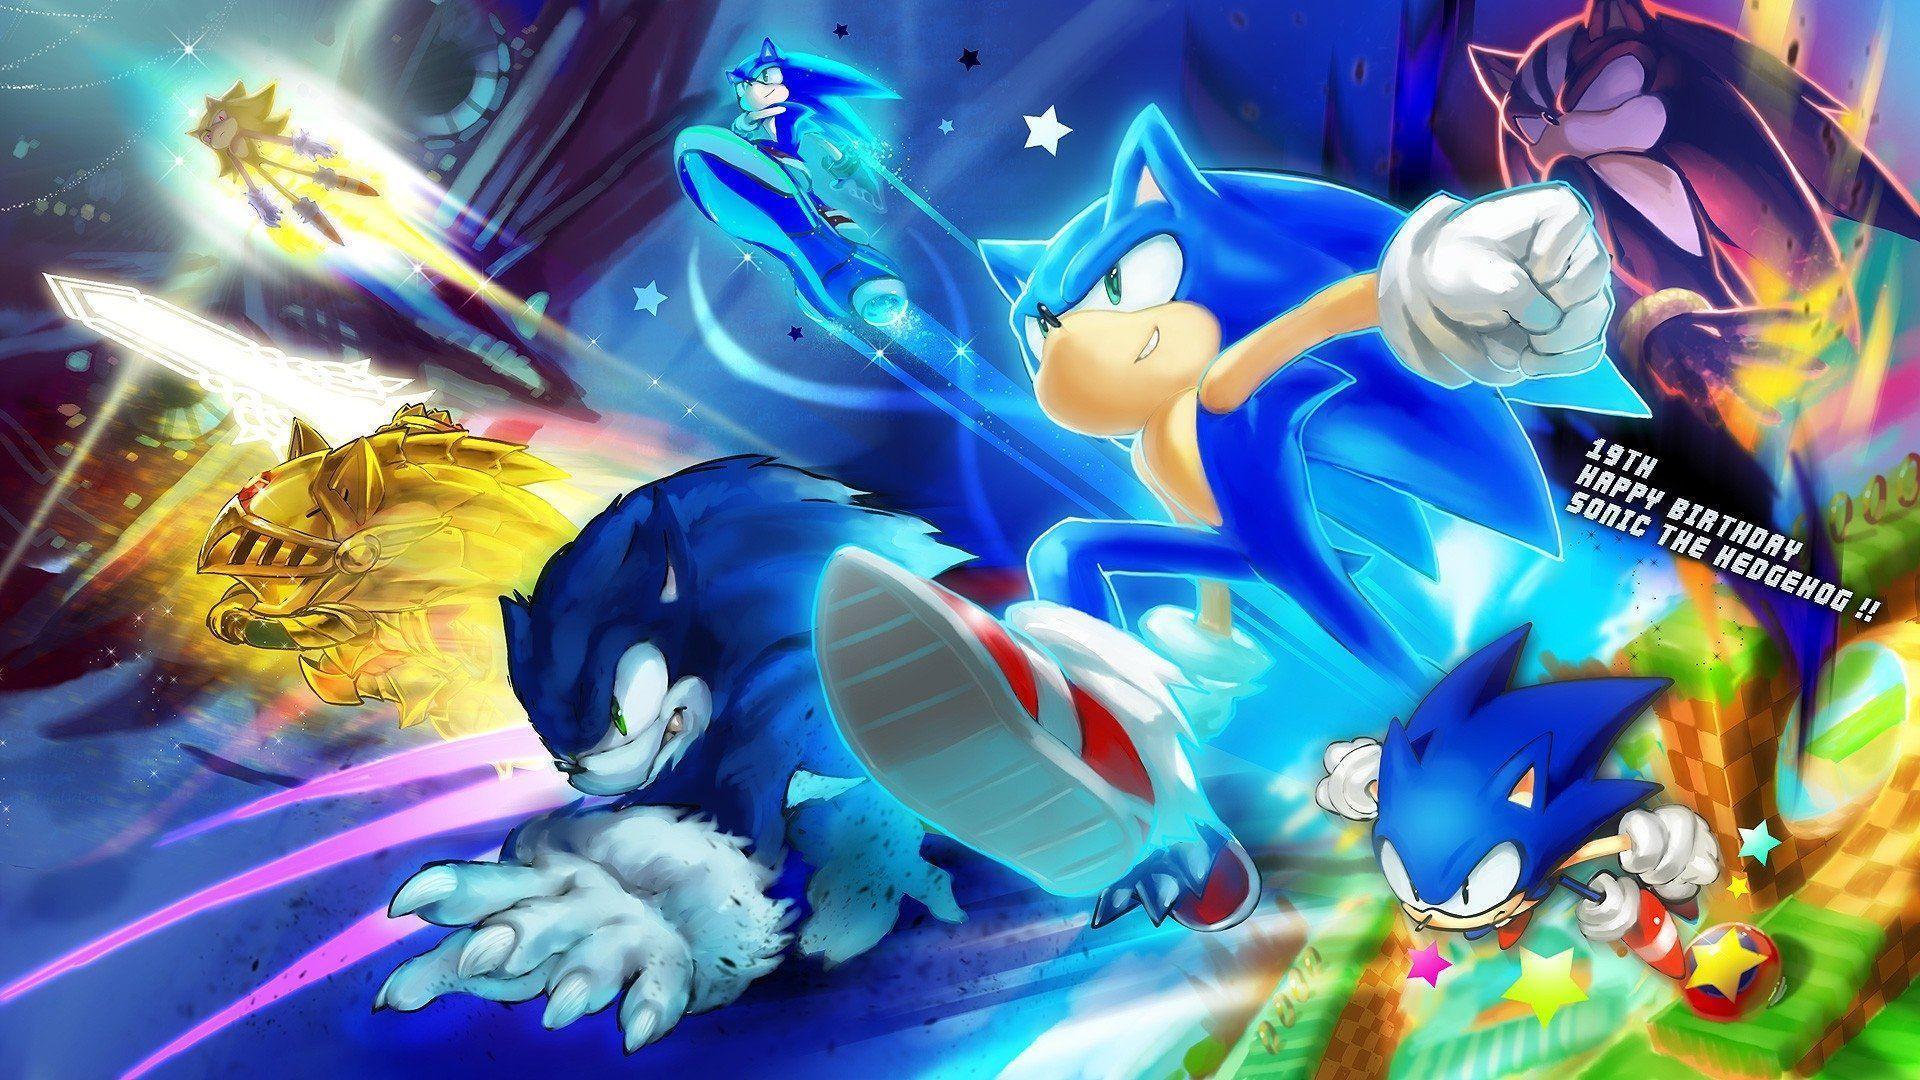 Sonic the Hedgehog HD Wallpaper and Background Image